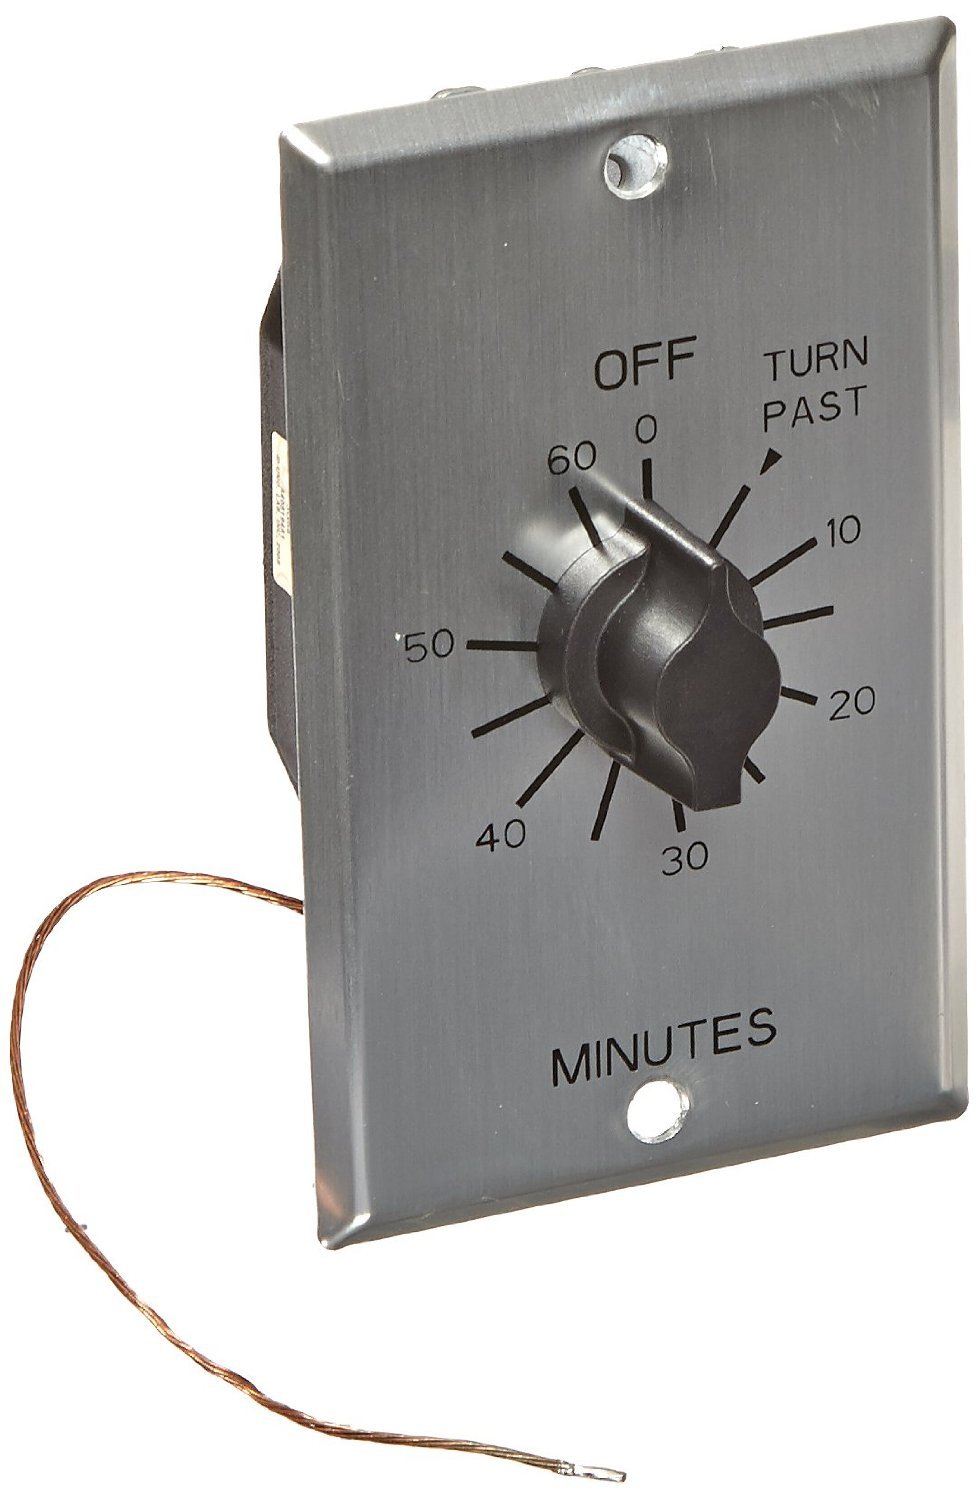 arlec timer switch instructions